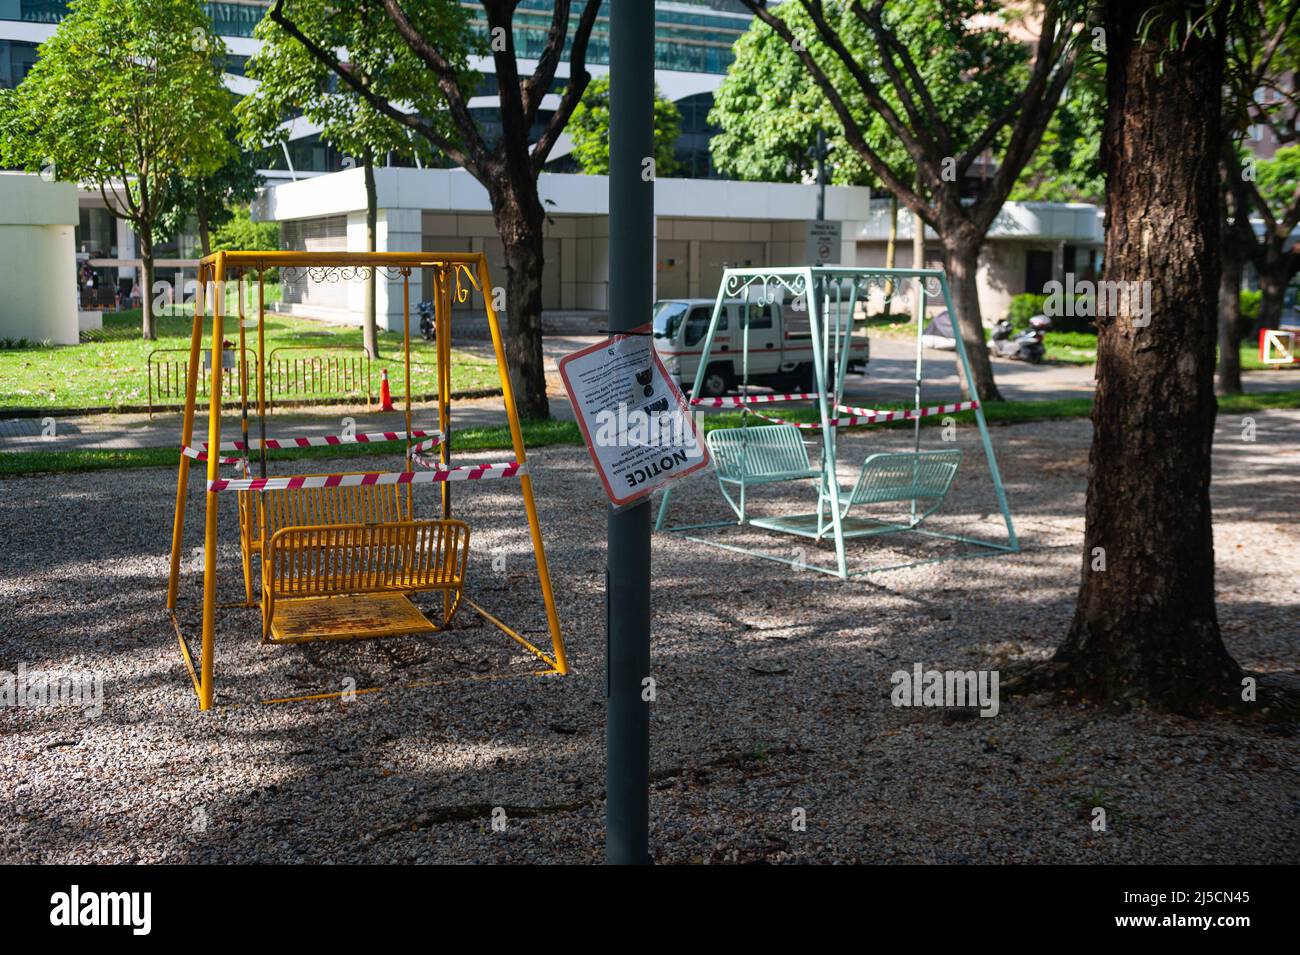 May 28, 2020, Singapore, Republic of Singapore, Asia - Swings in a small park in Dhoby Ghaut have been cordoned off with red and white barrier tape during curfews amid the Corona crisis to halt the spread of the pandemic coronavirus (Covid-19). Other precautionary measures were introduced in public life, such as the closure of all non-essential shops and retailers, as well as all schools until June 1. [automated translation] Stock Photo